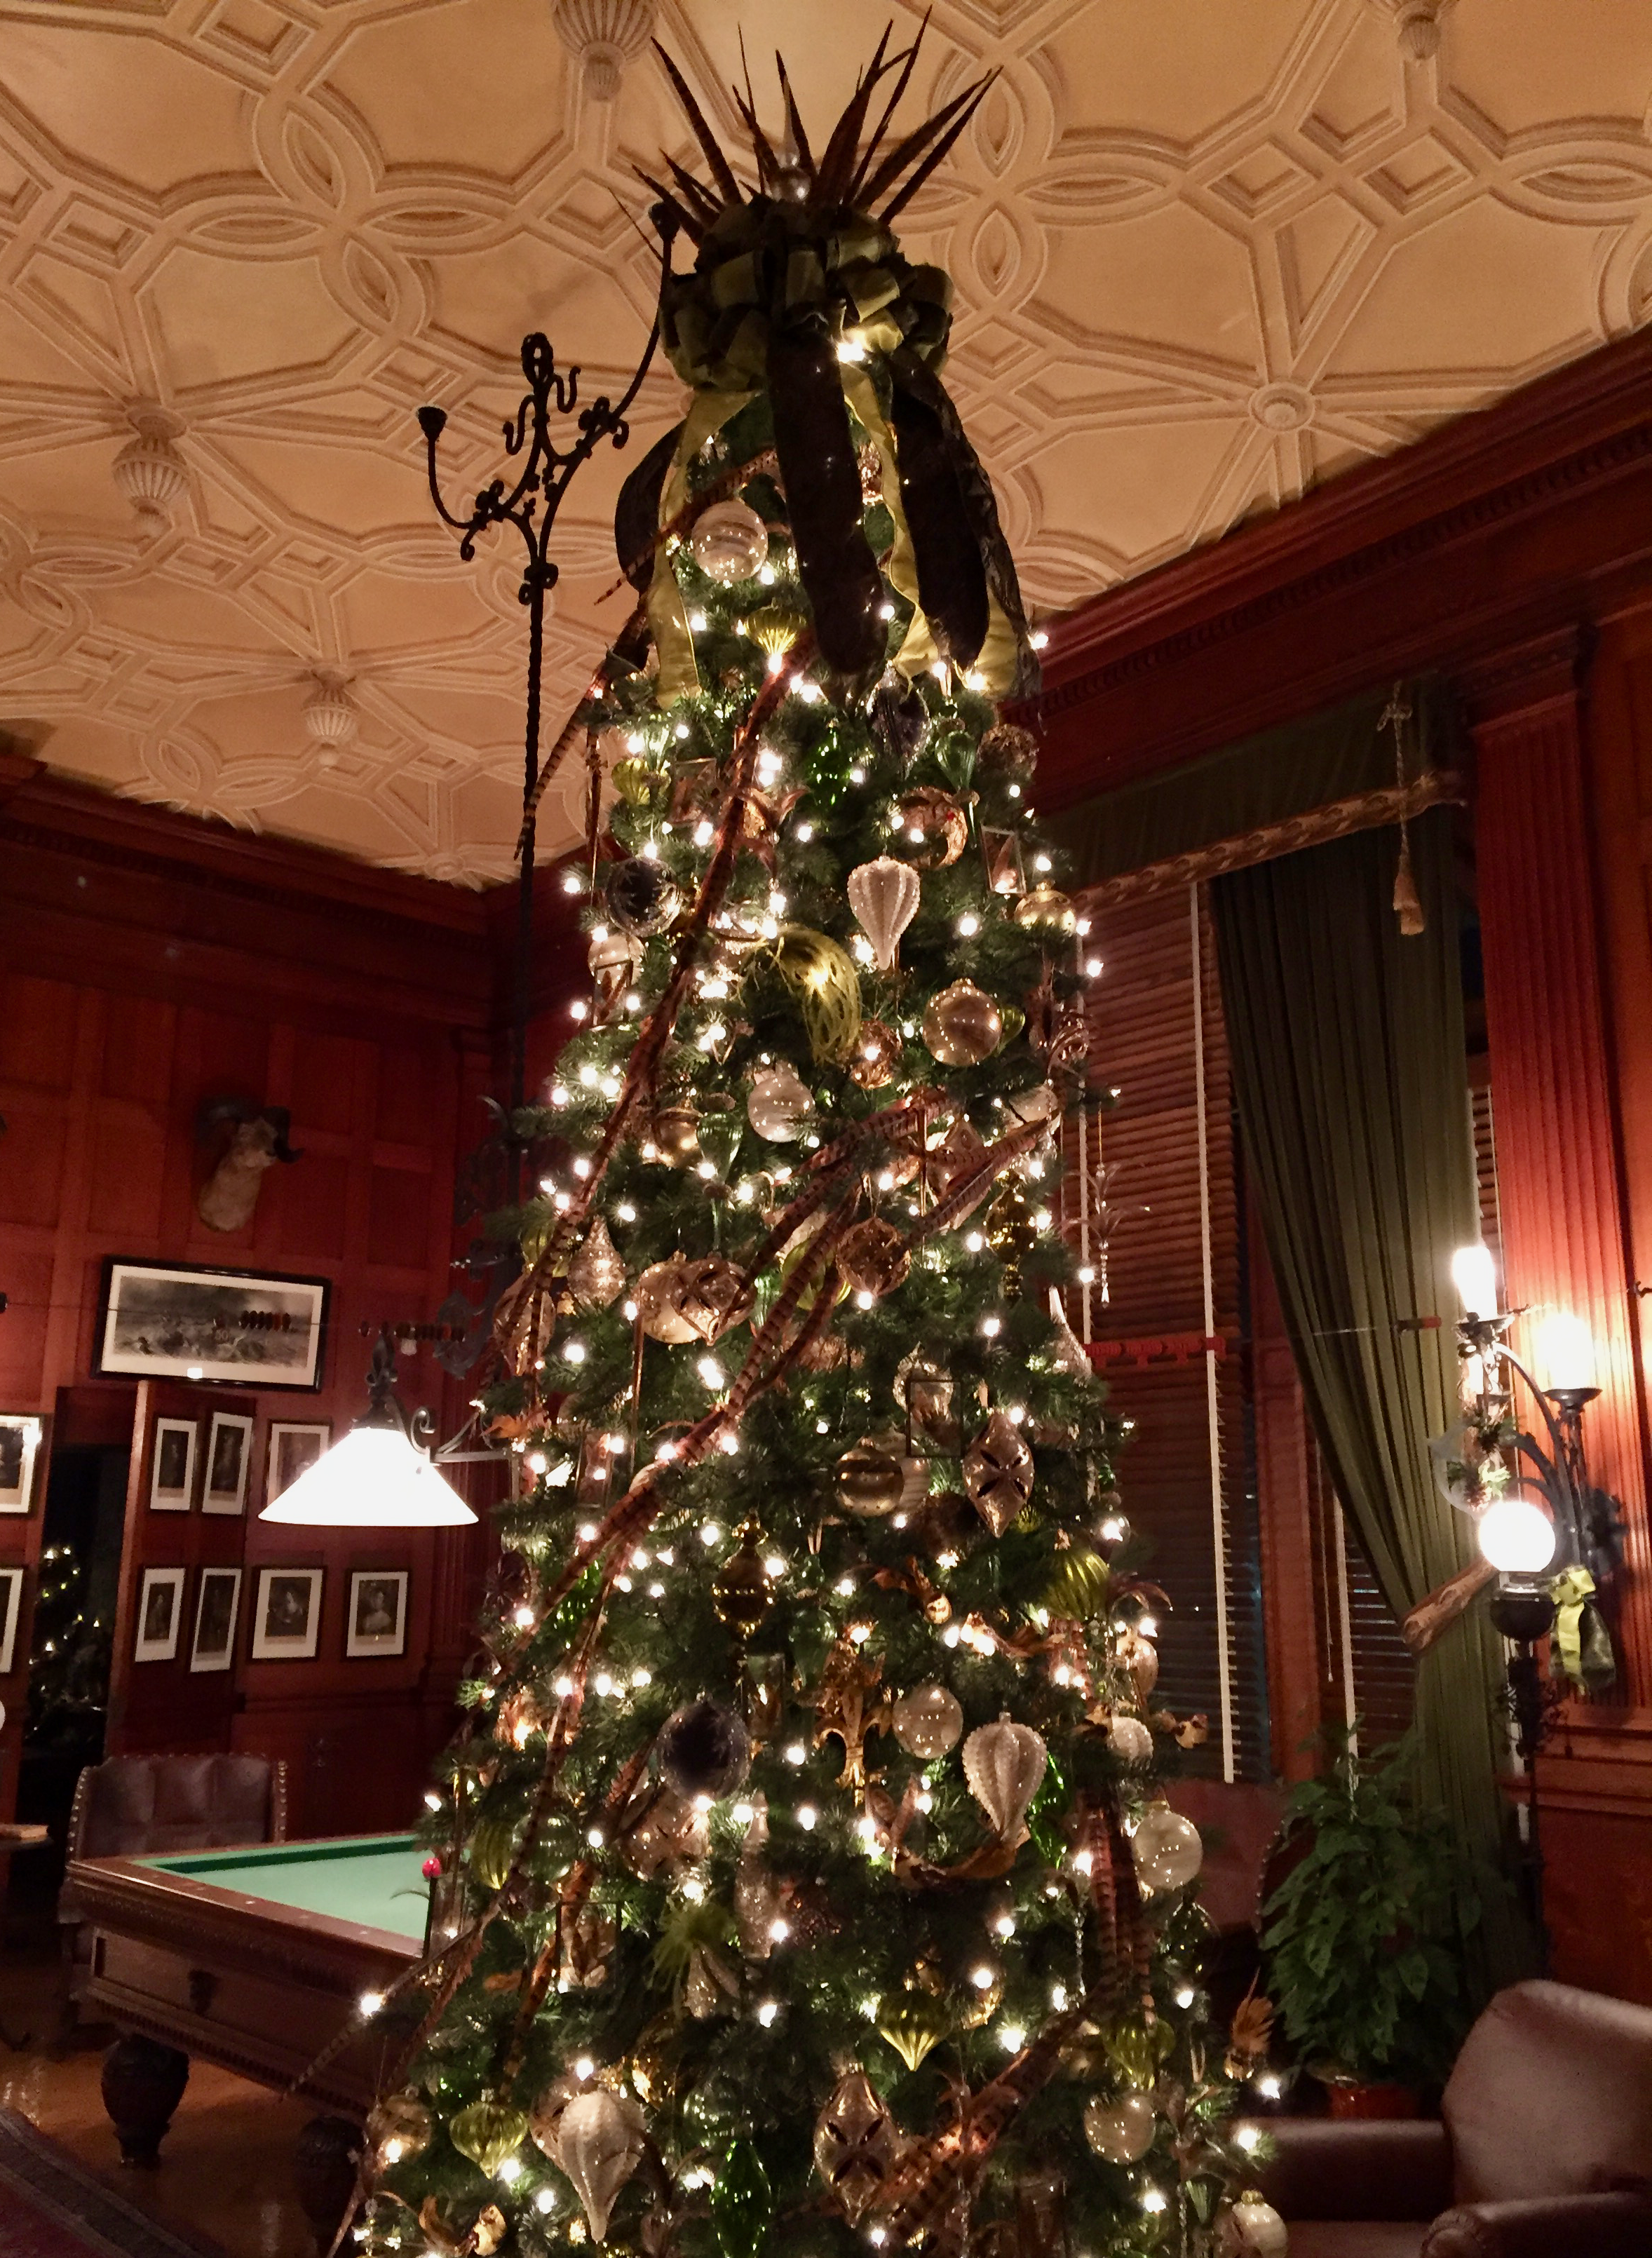 A stunning Christmas tree in the billiards room.